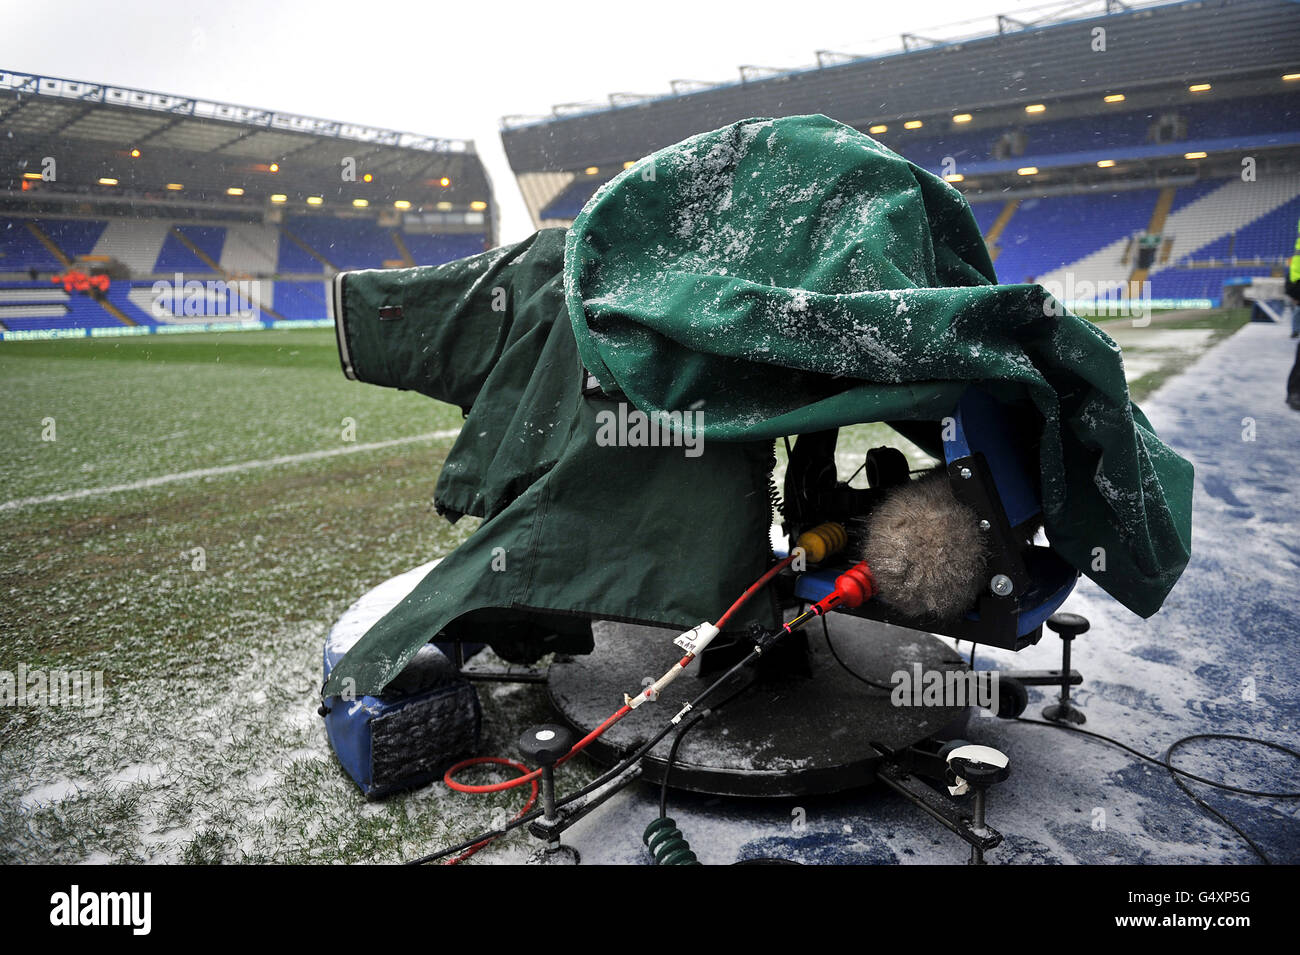 Soccer - npower Football League Championship - Birmingham City v Southampton - St Andrews. A covered television camera on the side of the pitch Stock Photo